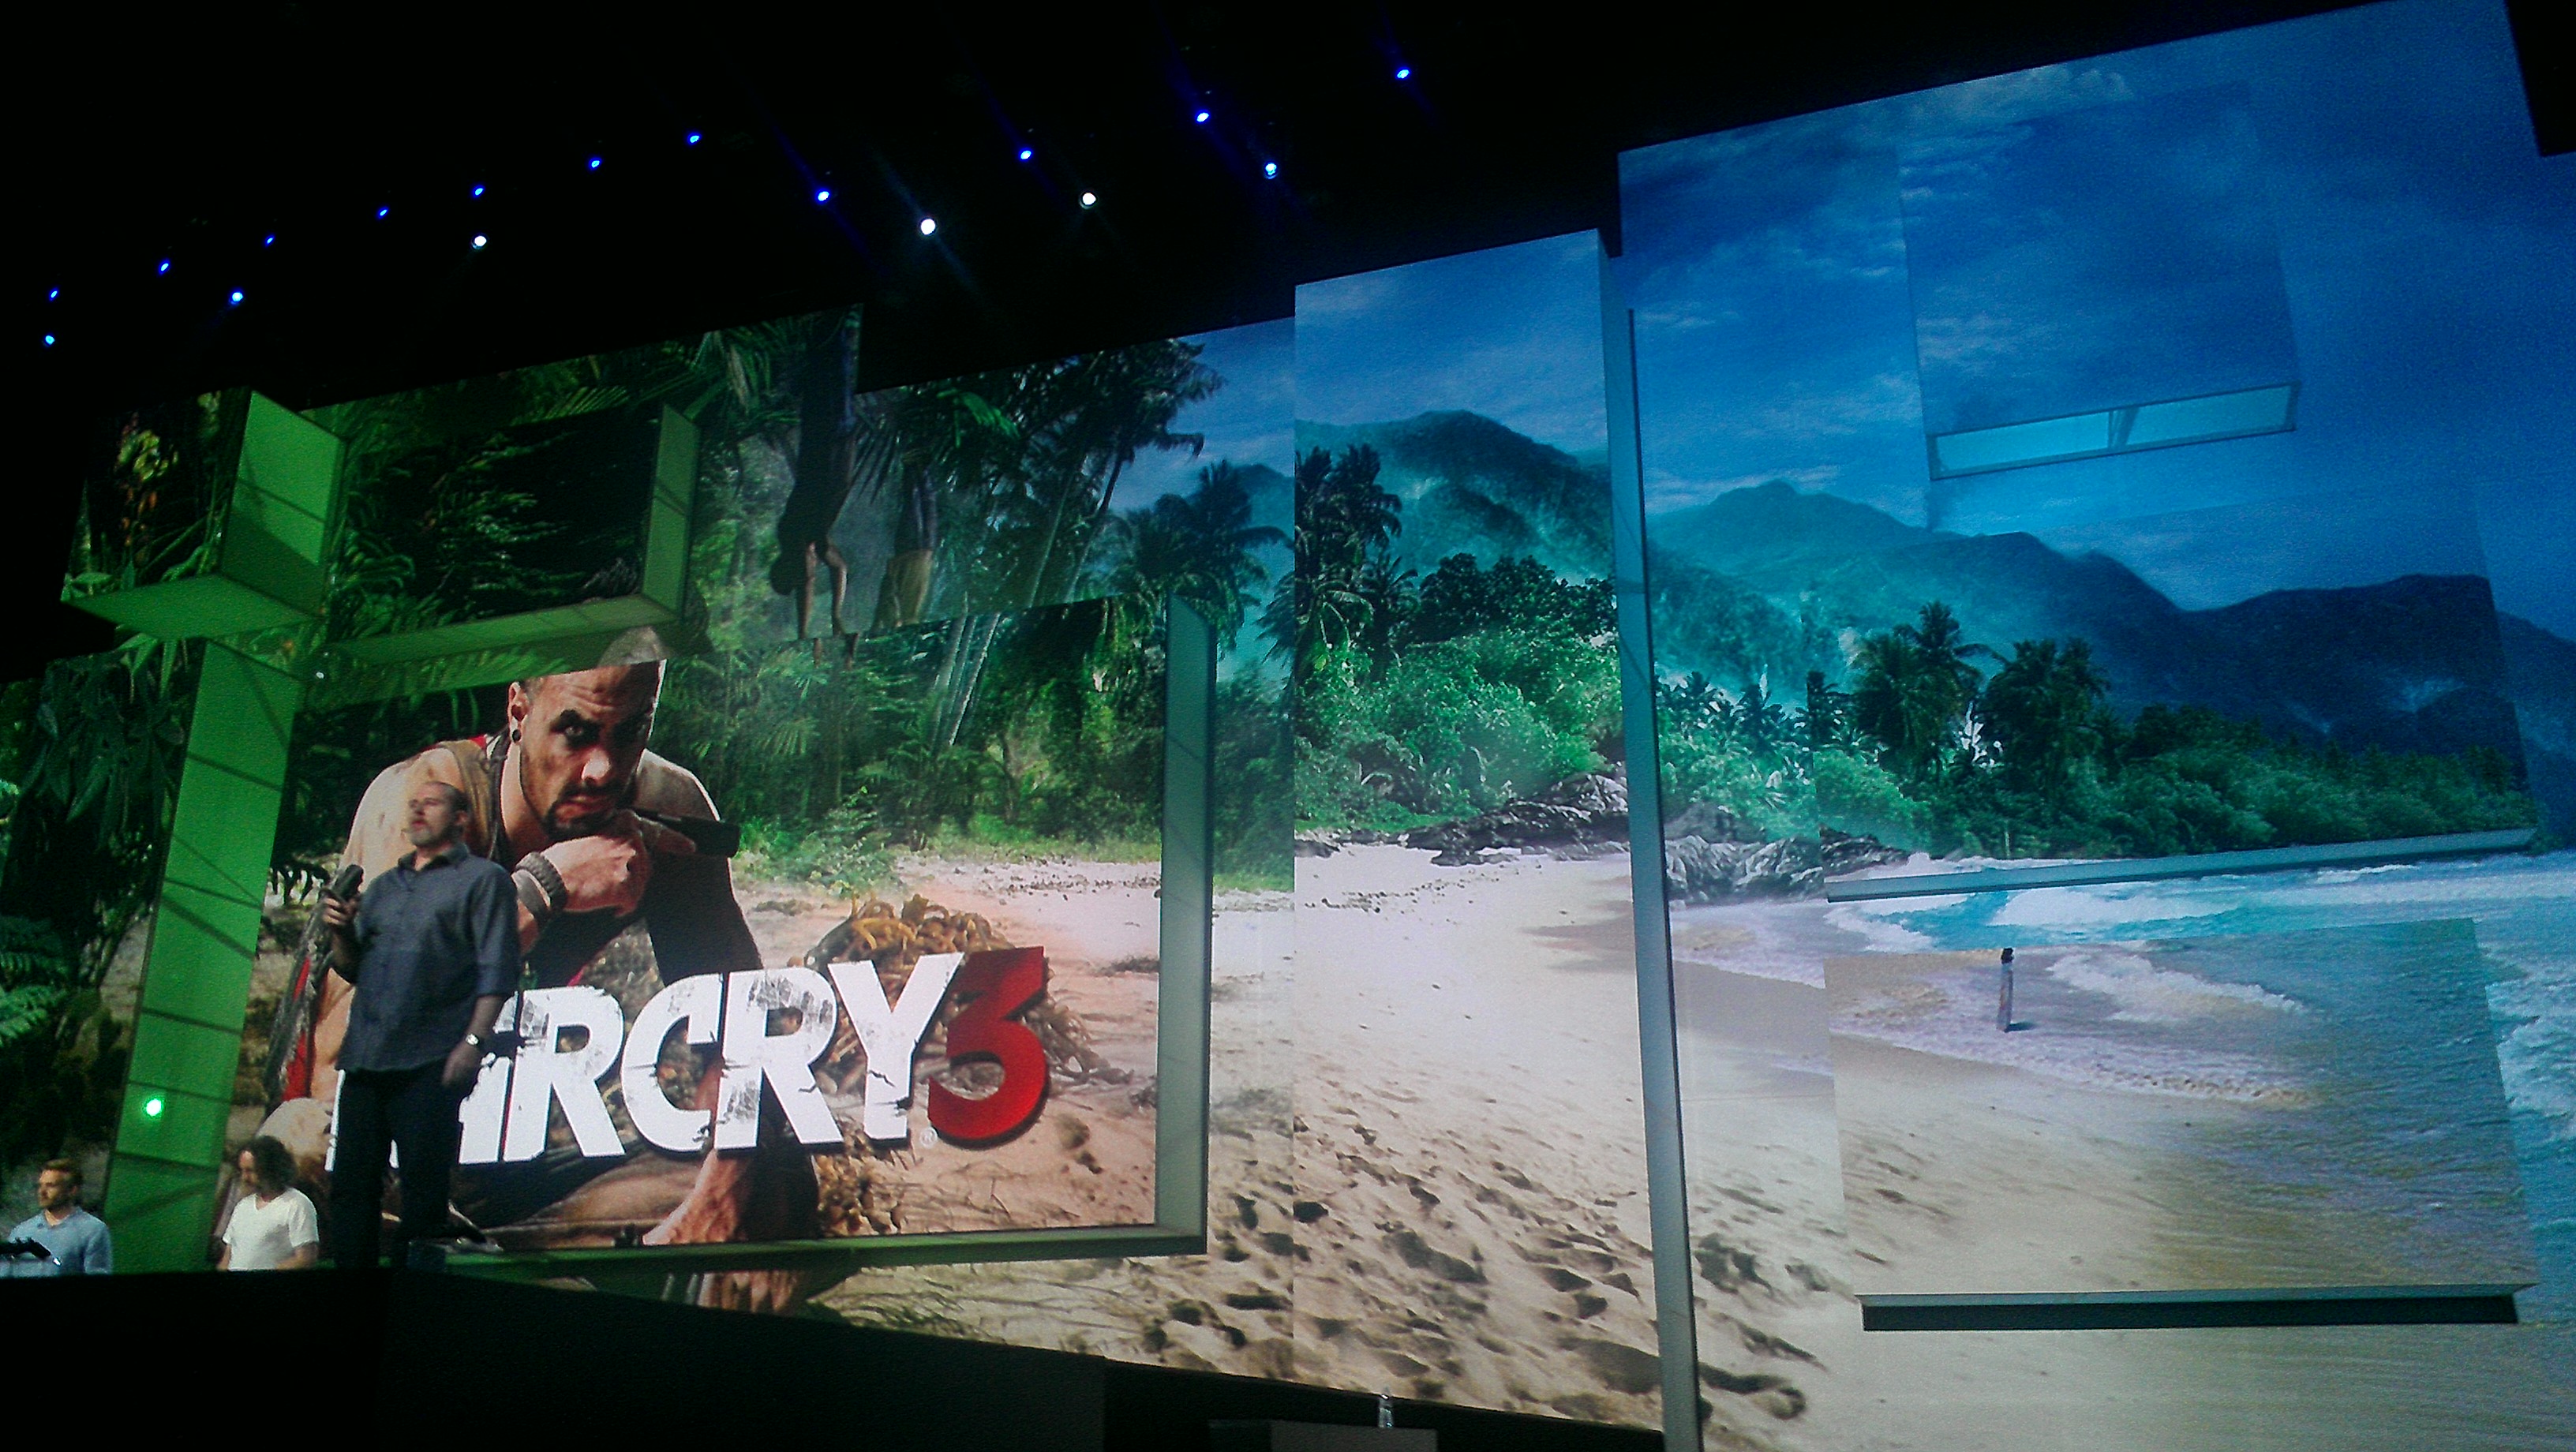 Ubisoft: Far Cry 3 Means Tears of Joy for Fans